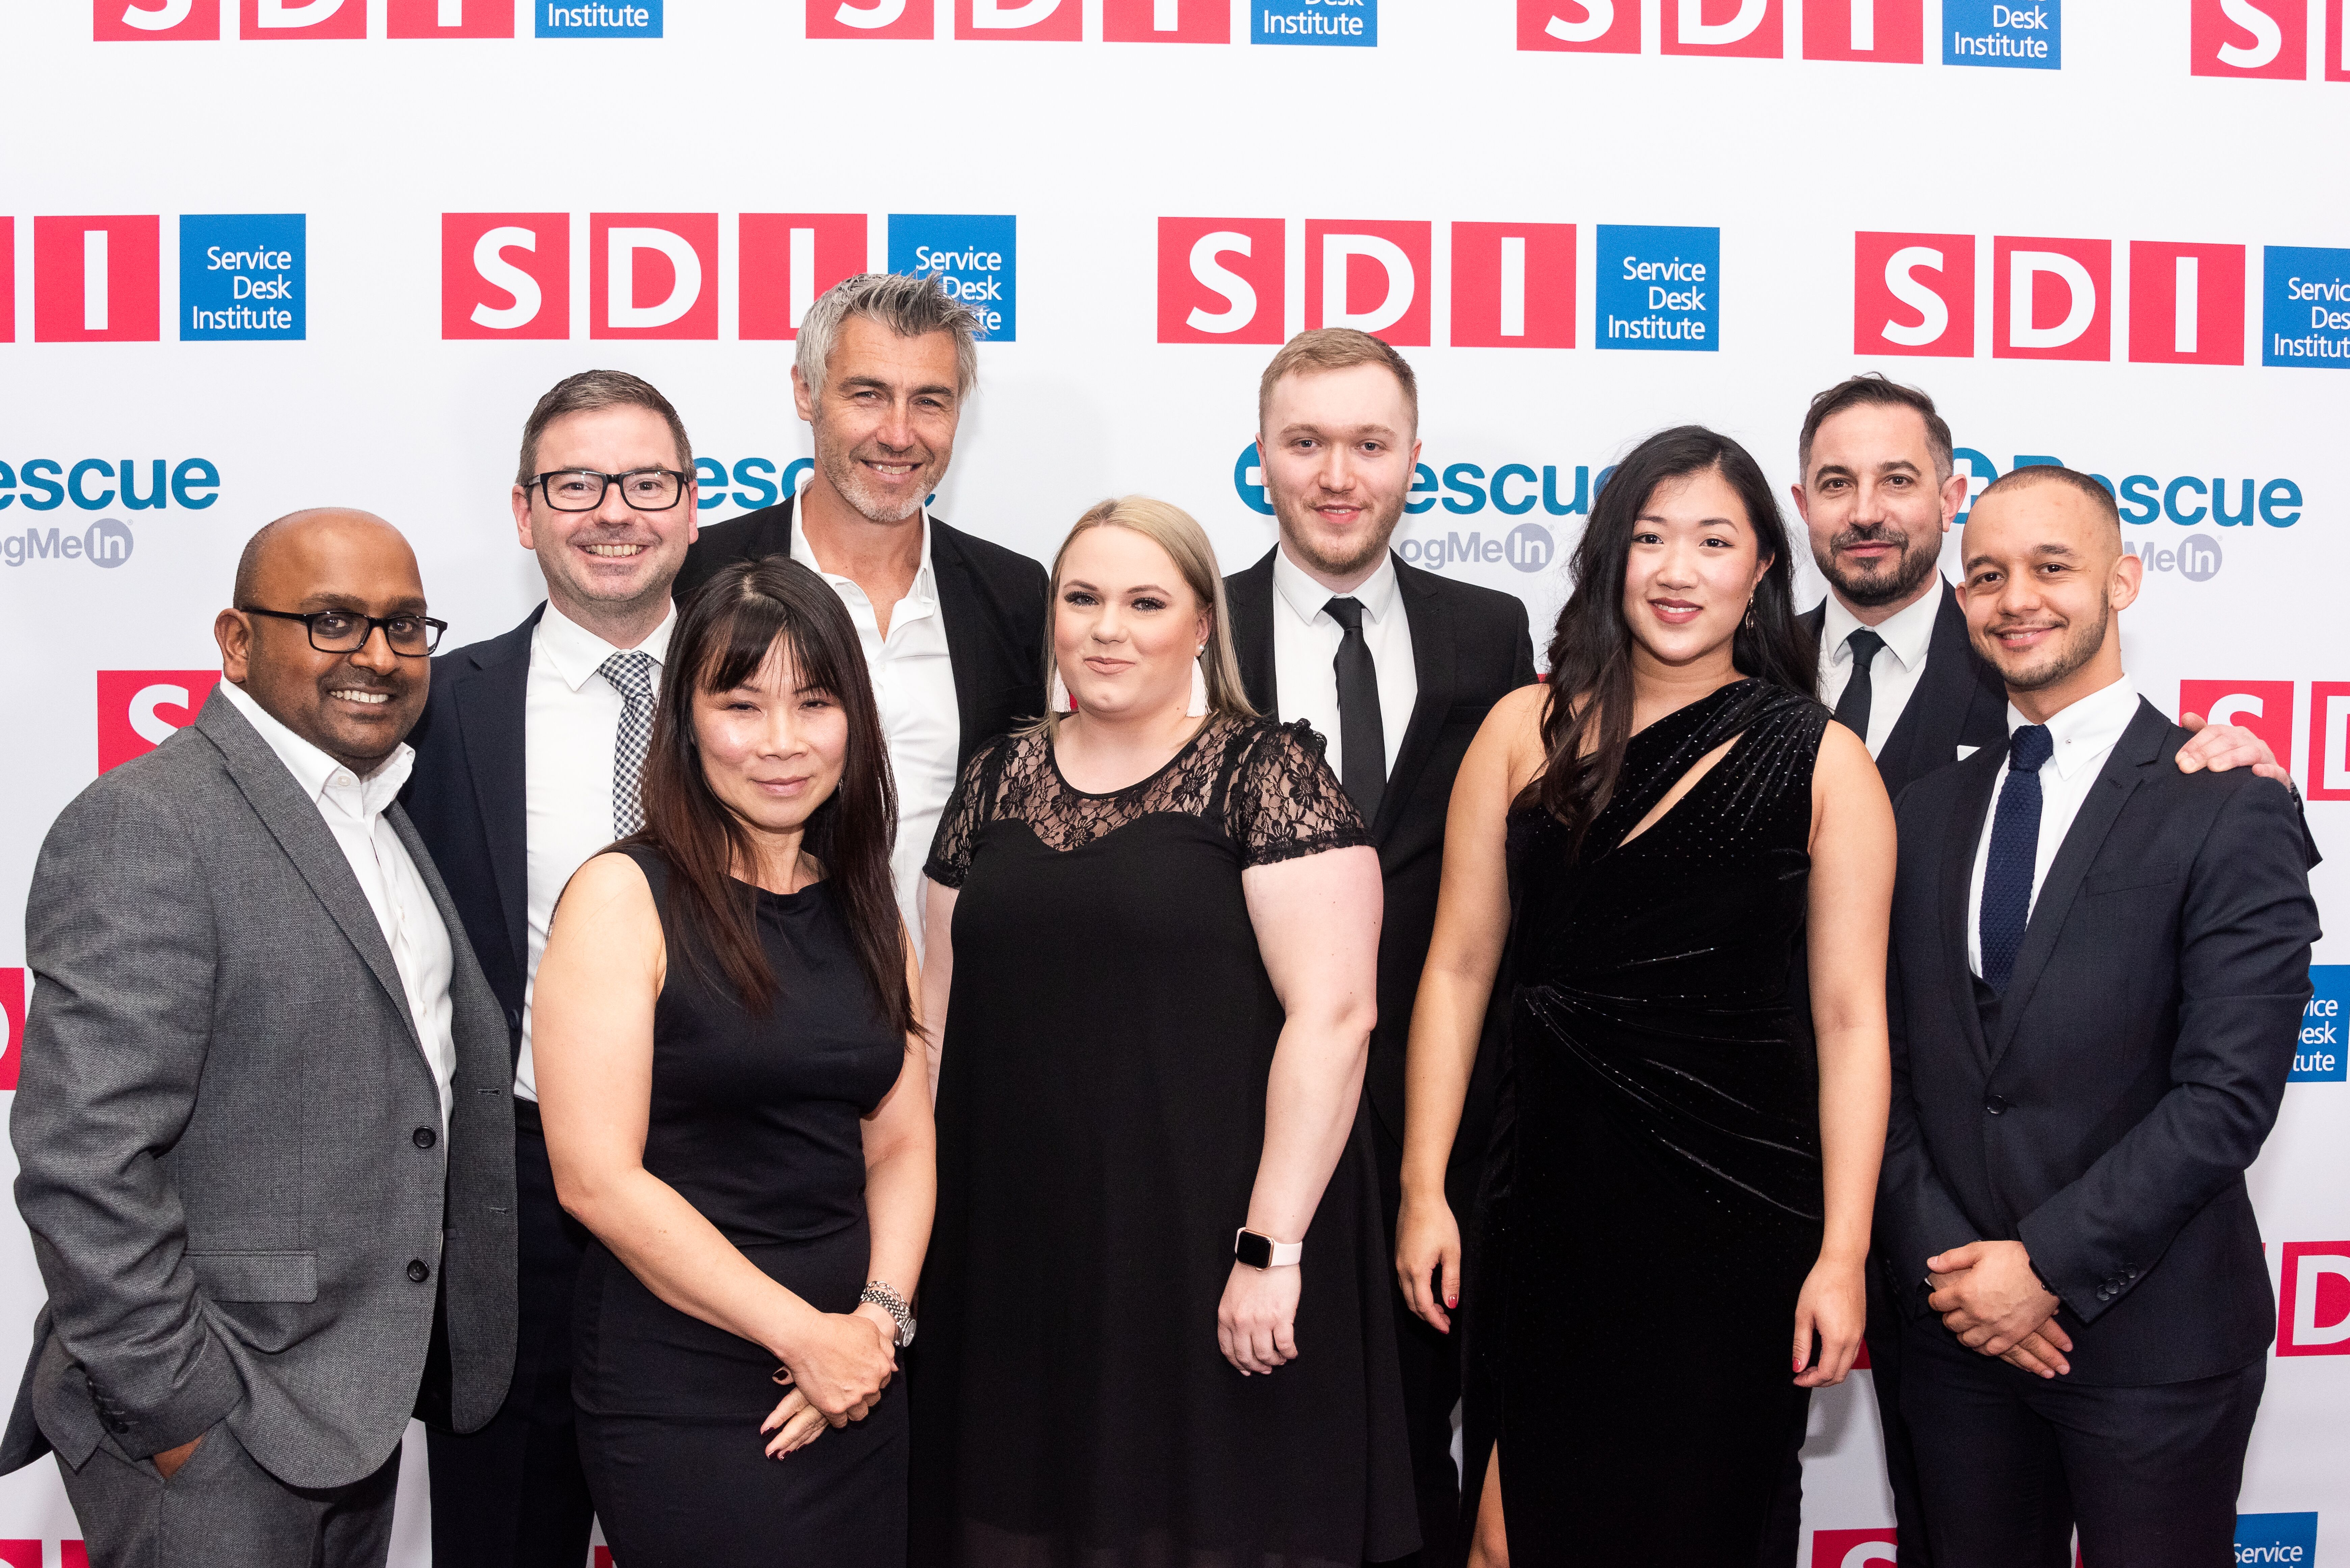 Support Tree are SDI Best Small Enterprise MSP finalists!